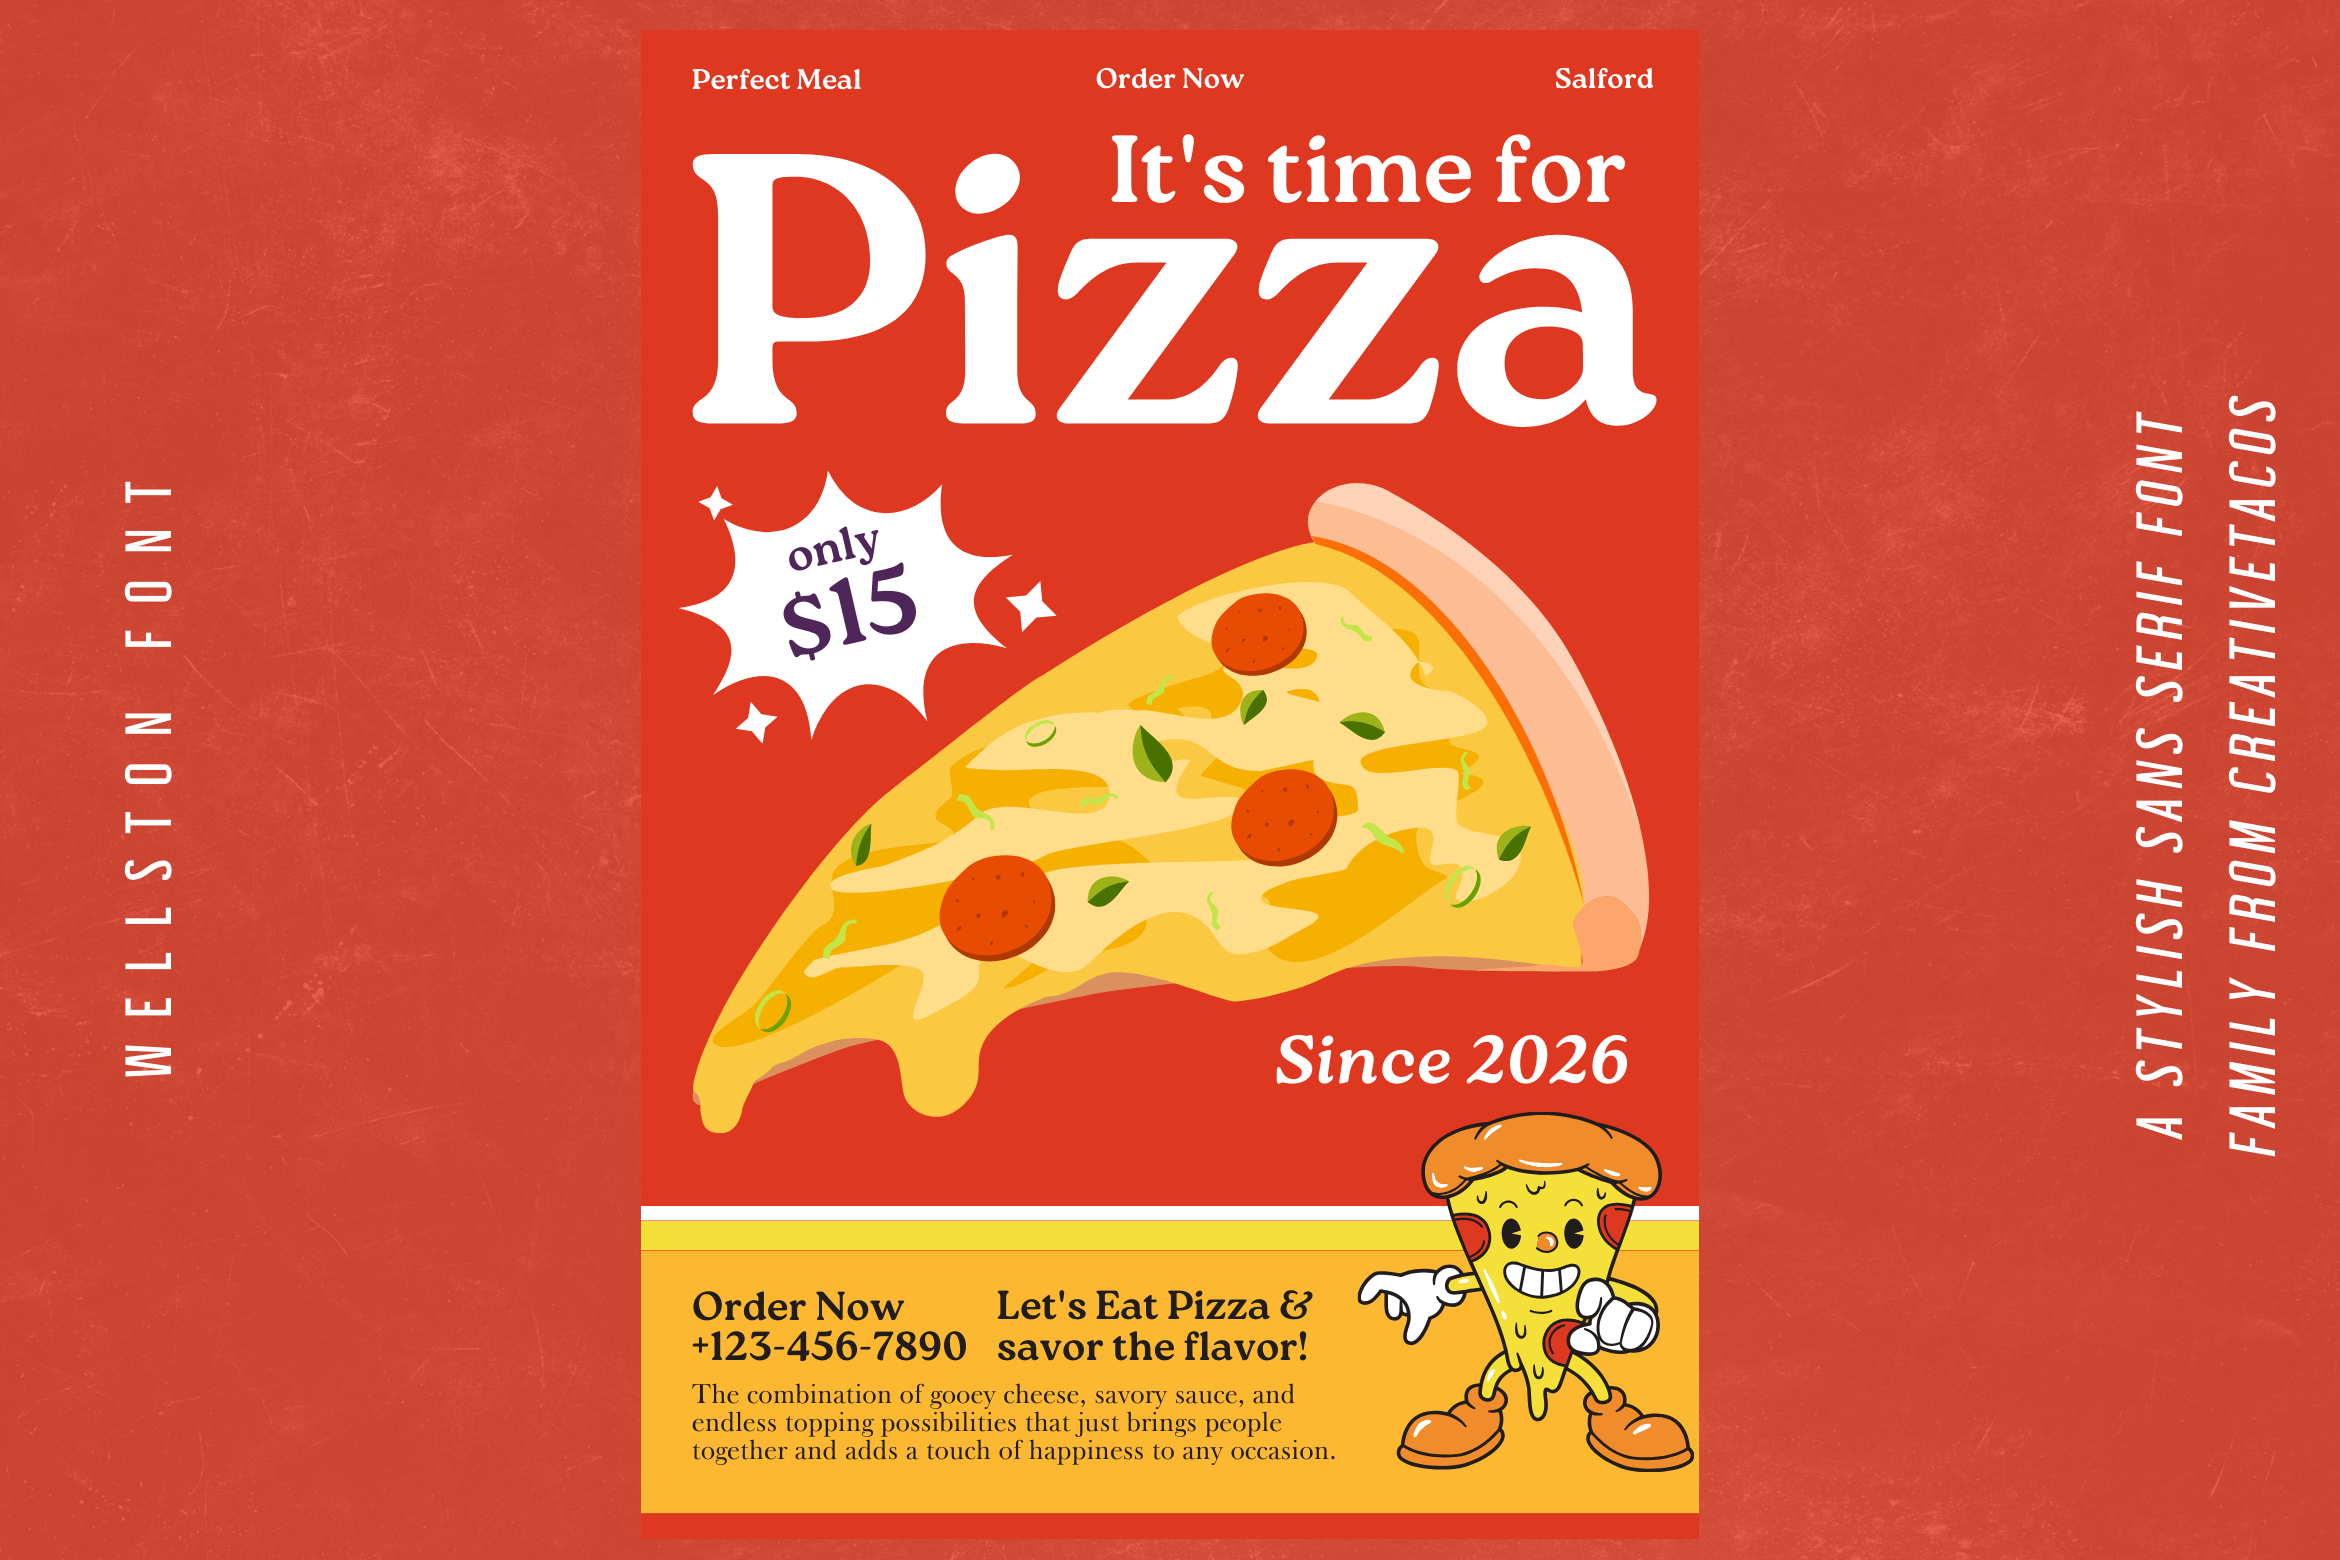 Red flyer advertising pizza for $15 with an illustrated slice and cartoon pizza character, text in Wellston font, including a phone number.